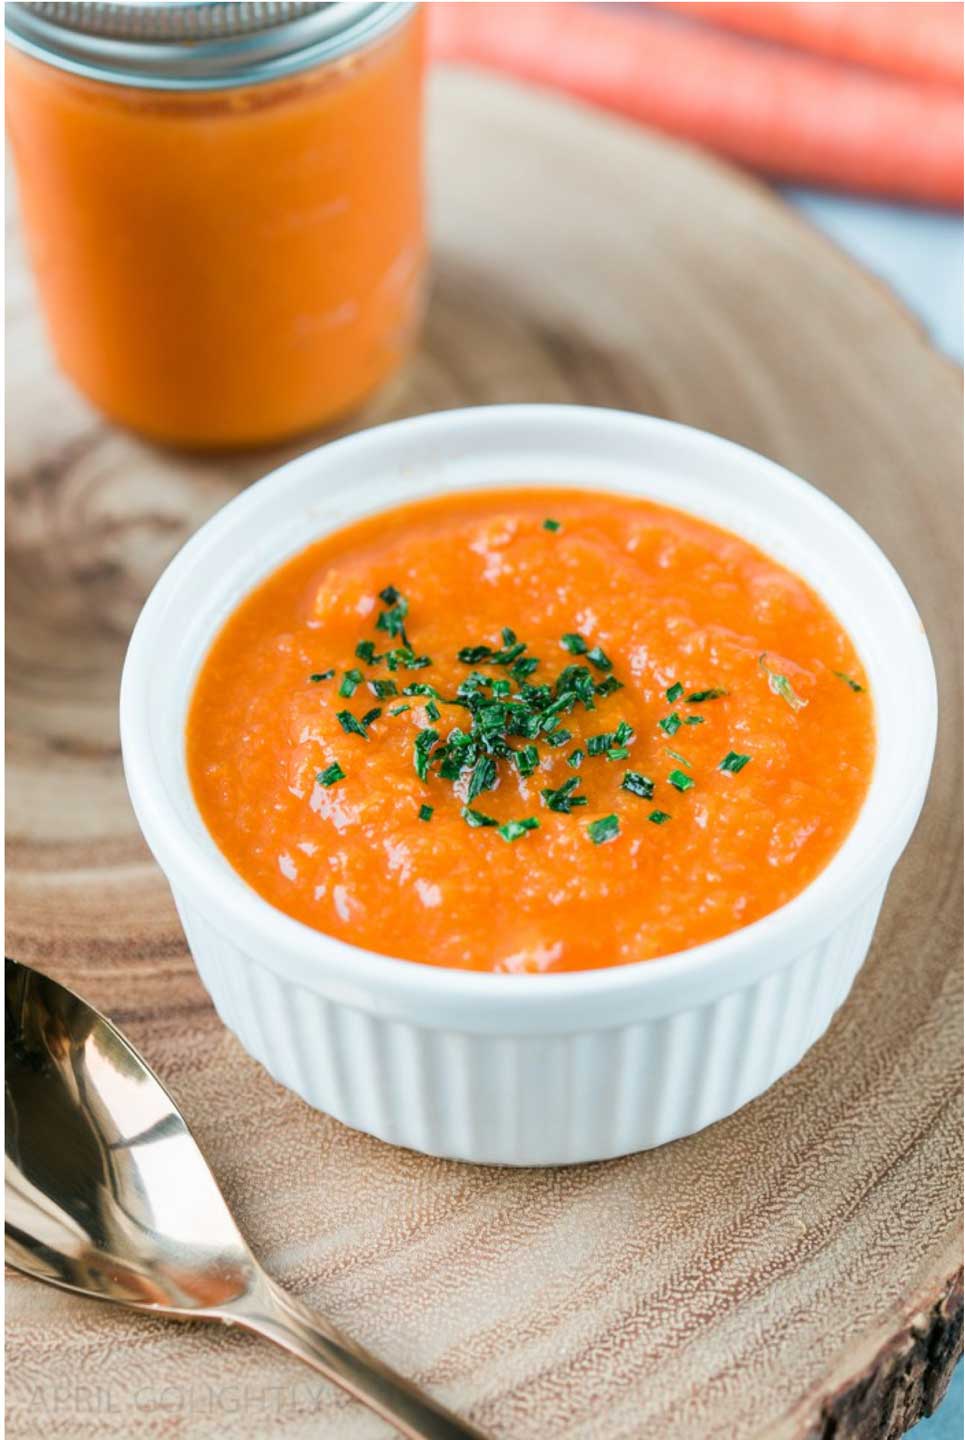 The Easter Bunny would definitely approve of this gorgeous vegan Instant Pot Carrot Soup from April at April Golightly! Be sure to check out our full line-up of pressure cooker vegetable soup recipes, too!